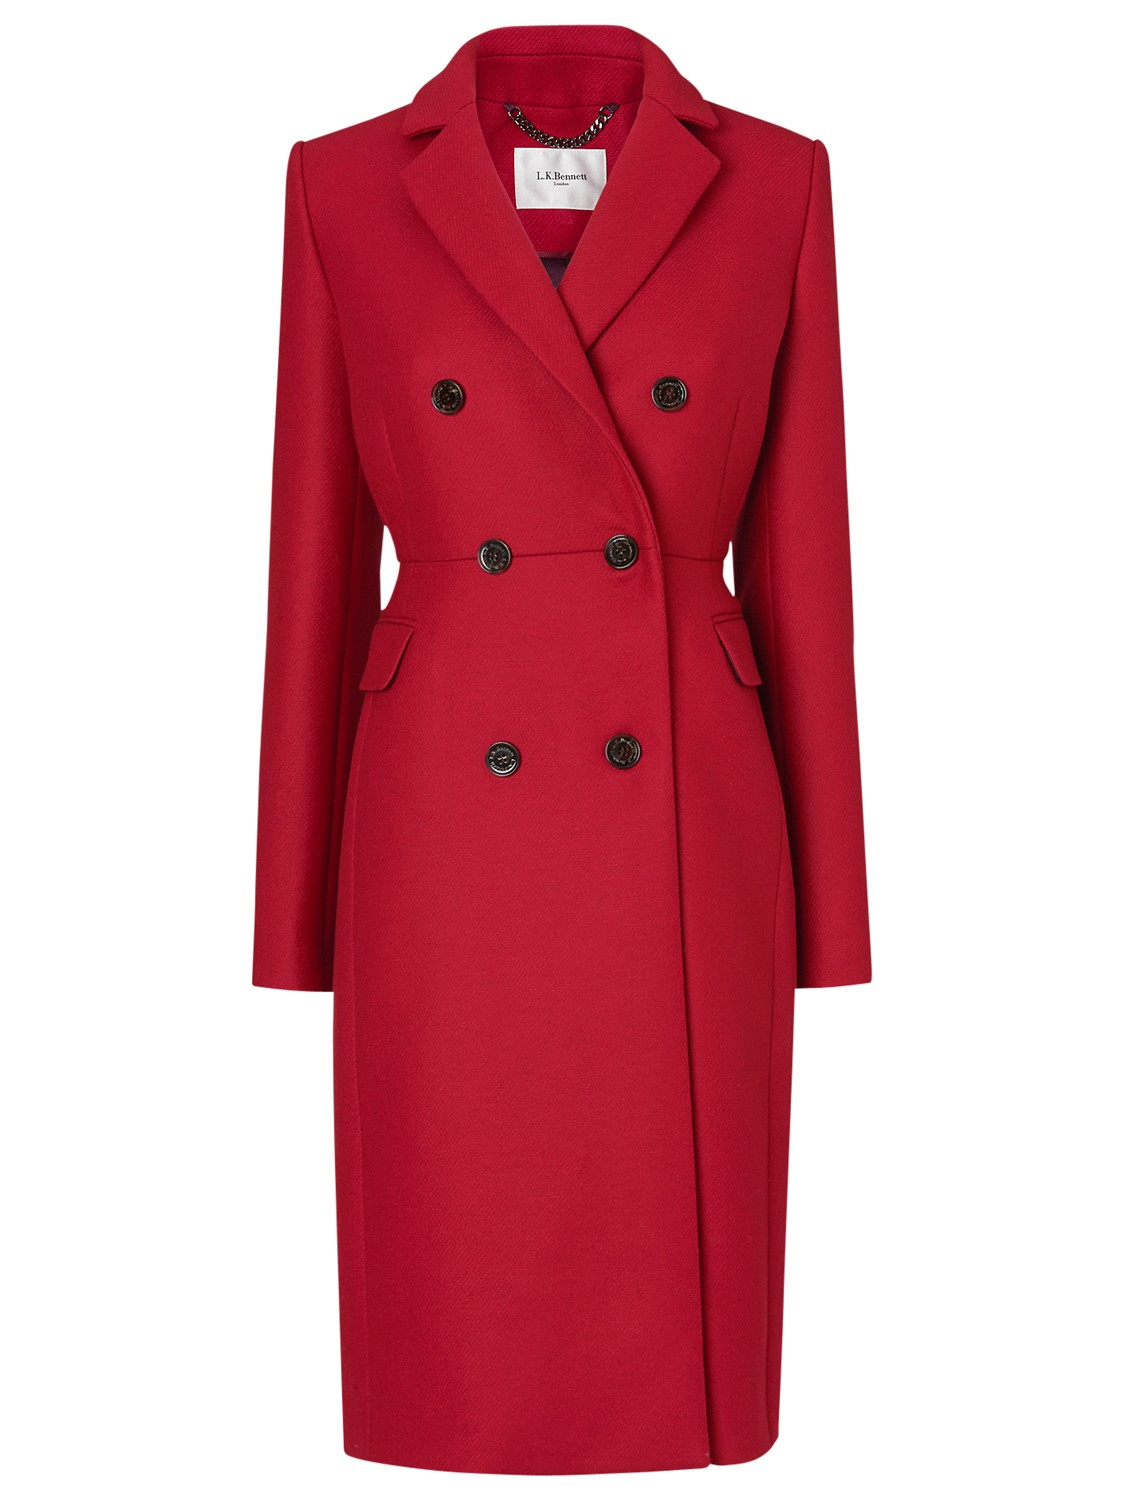 L.K.Bennett Caleste Double Breasted Coat in Red - Lyst